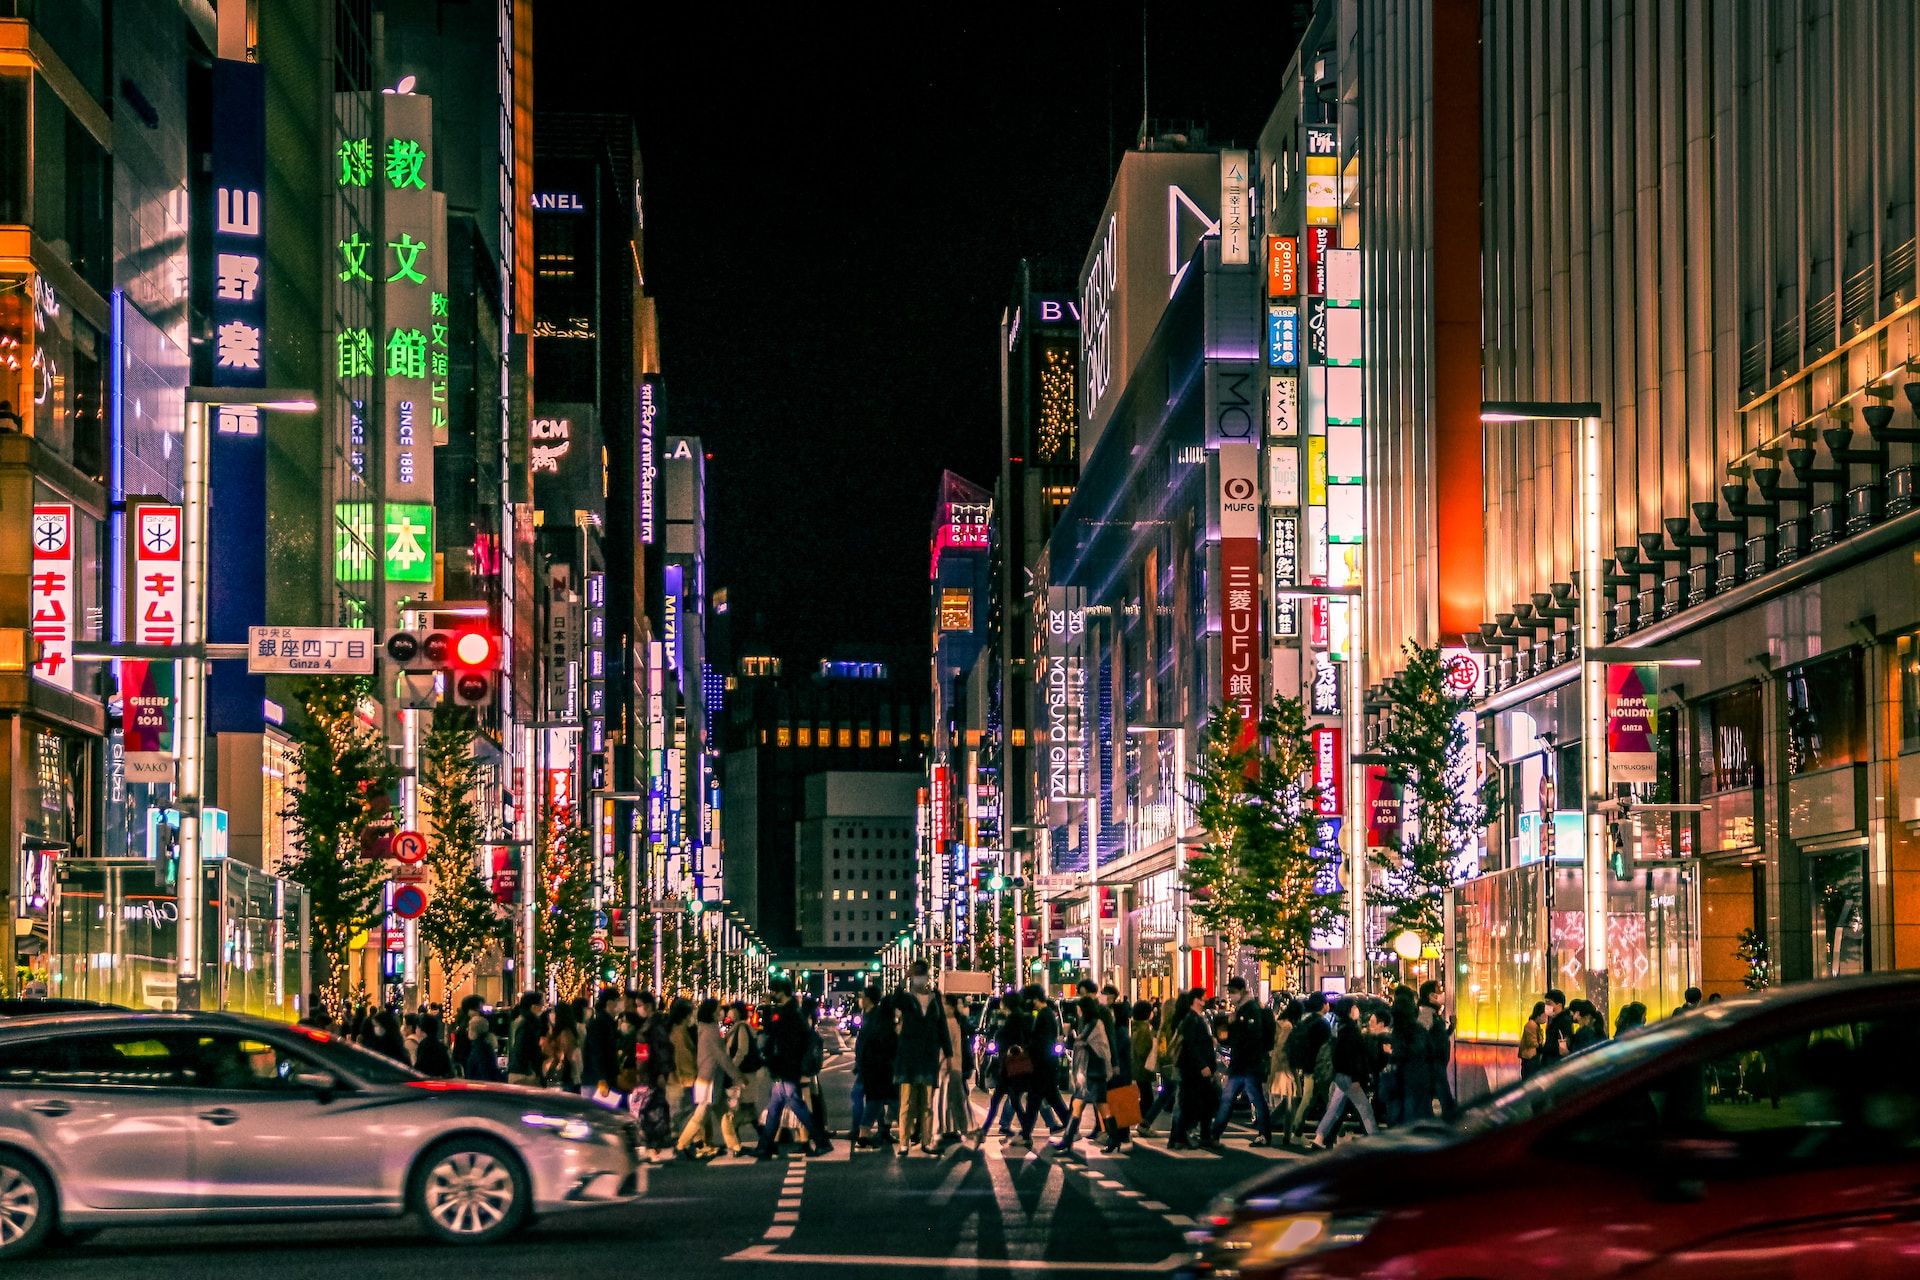 A street in Ginza, Tokyo